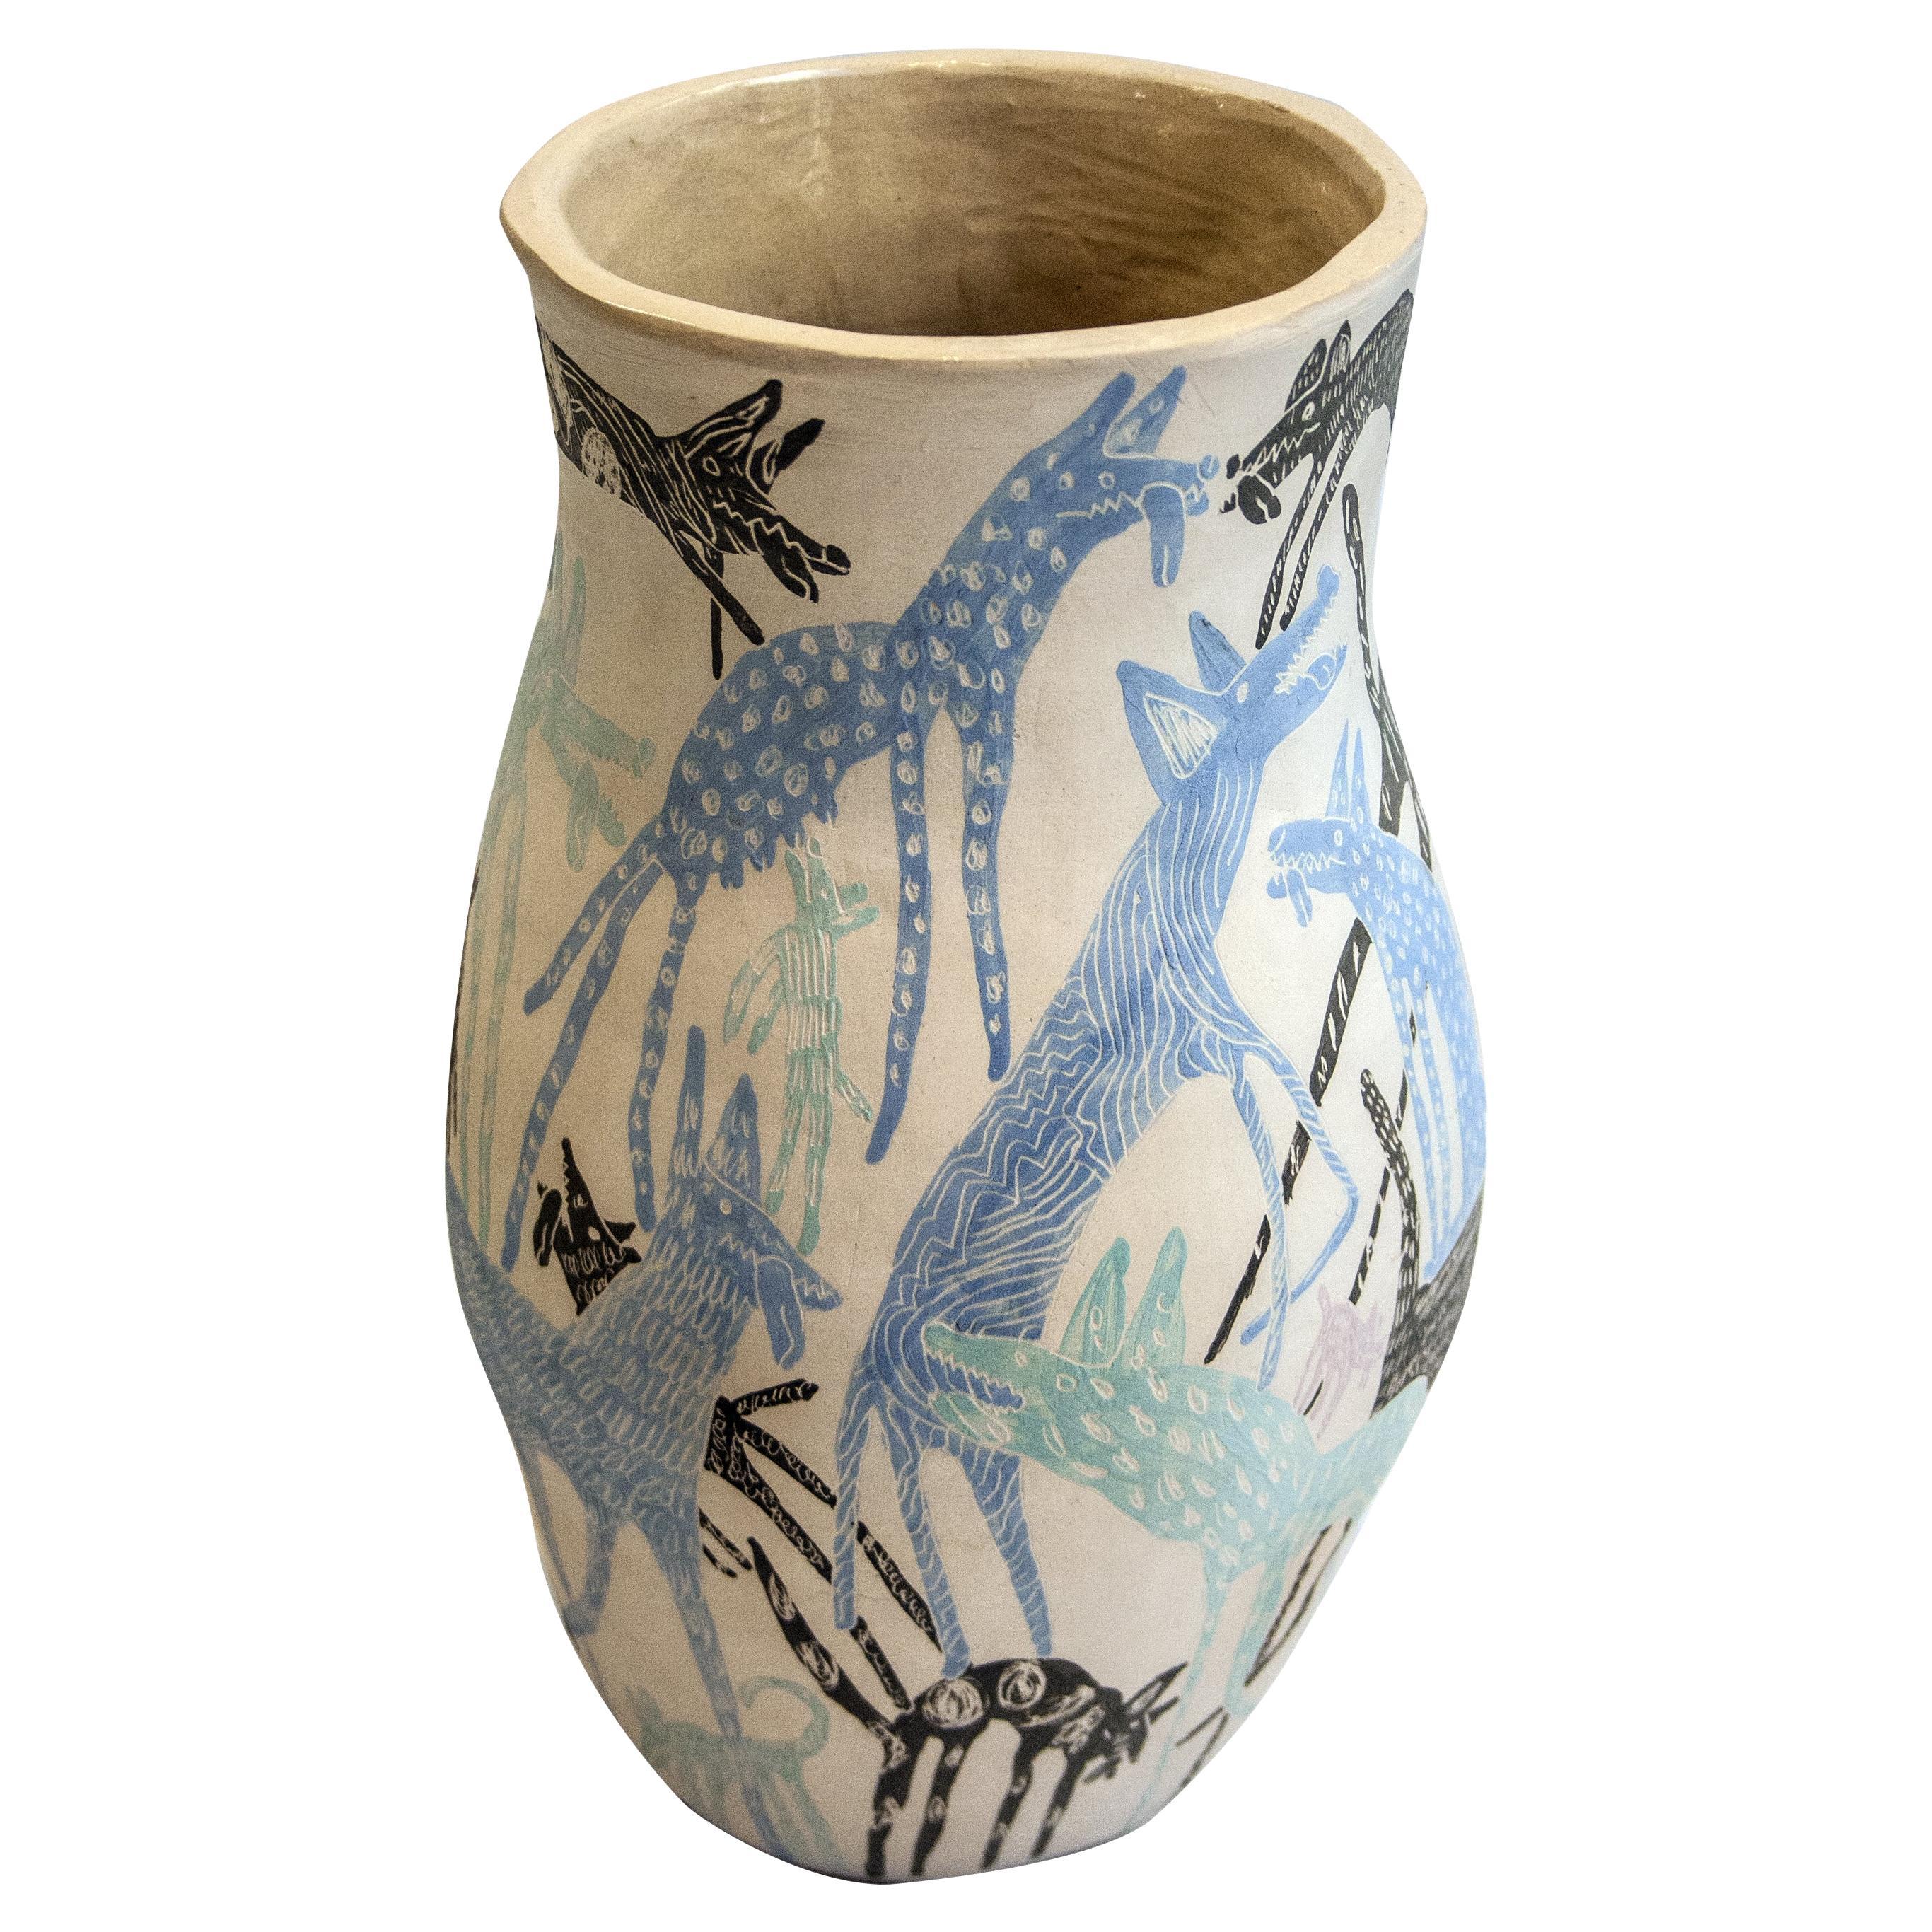 Handcrafted Ceramic Vase, "Stray Dogs" by "Elamorylabelleza" , Spain, 2022 For Sale